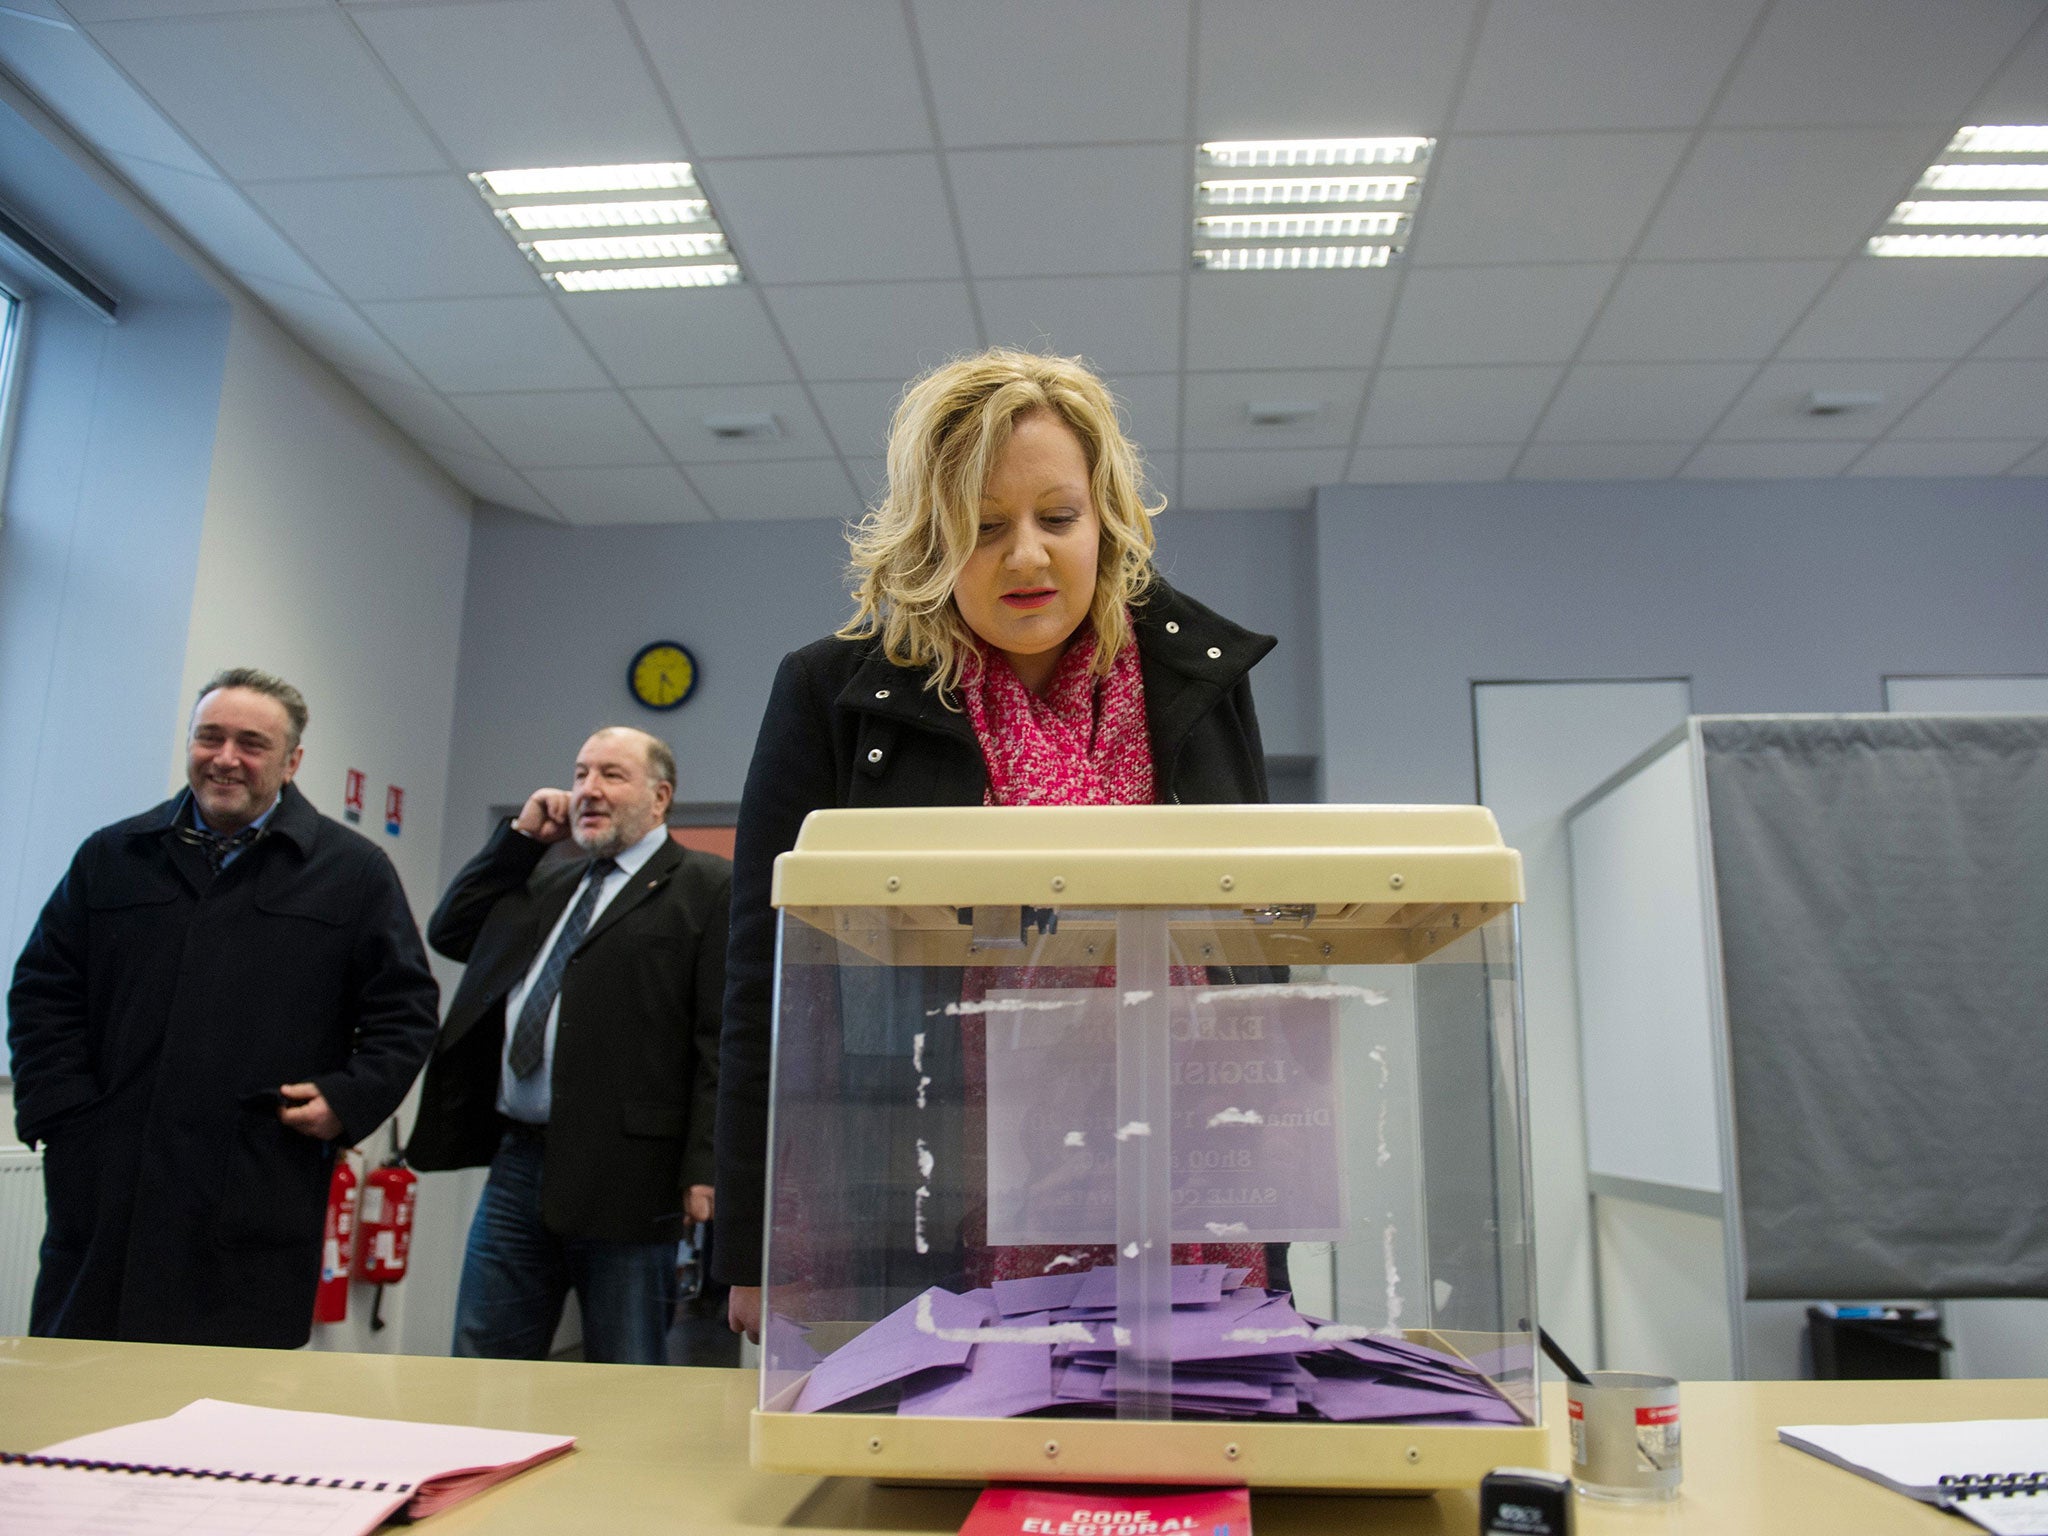 Sophie Montel, French far-right National Front candidate, looks at a ballot box as she arrives at a polling station for the first round of a by-election in the 4th constituency of the Doubs